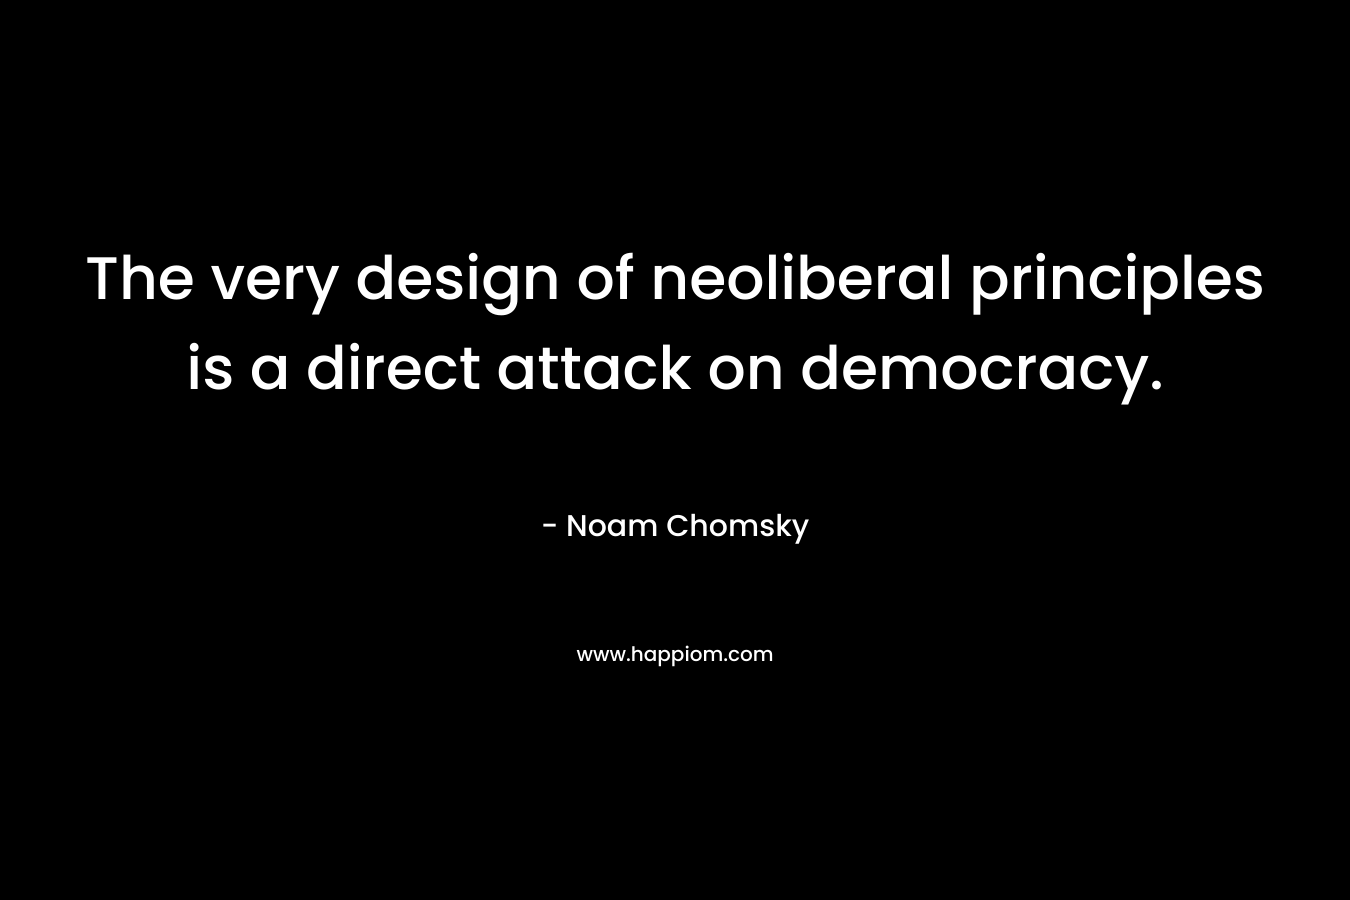 The very design of neoliberal principles is a direct attack on democracy.